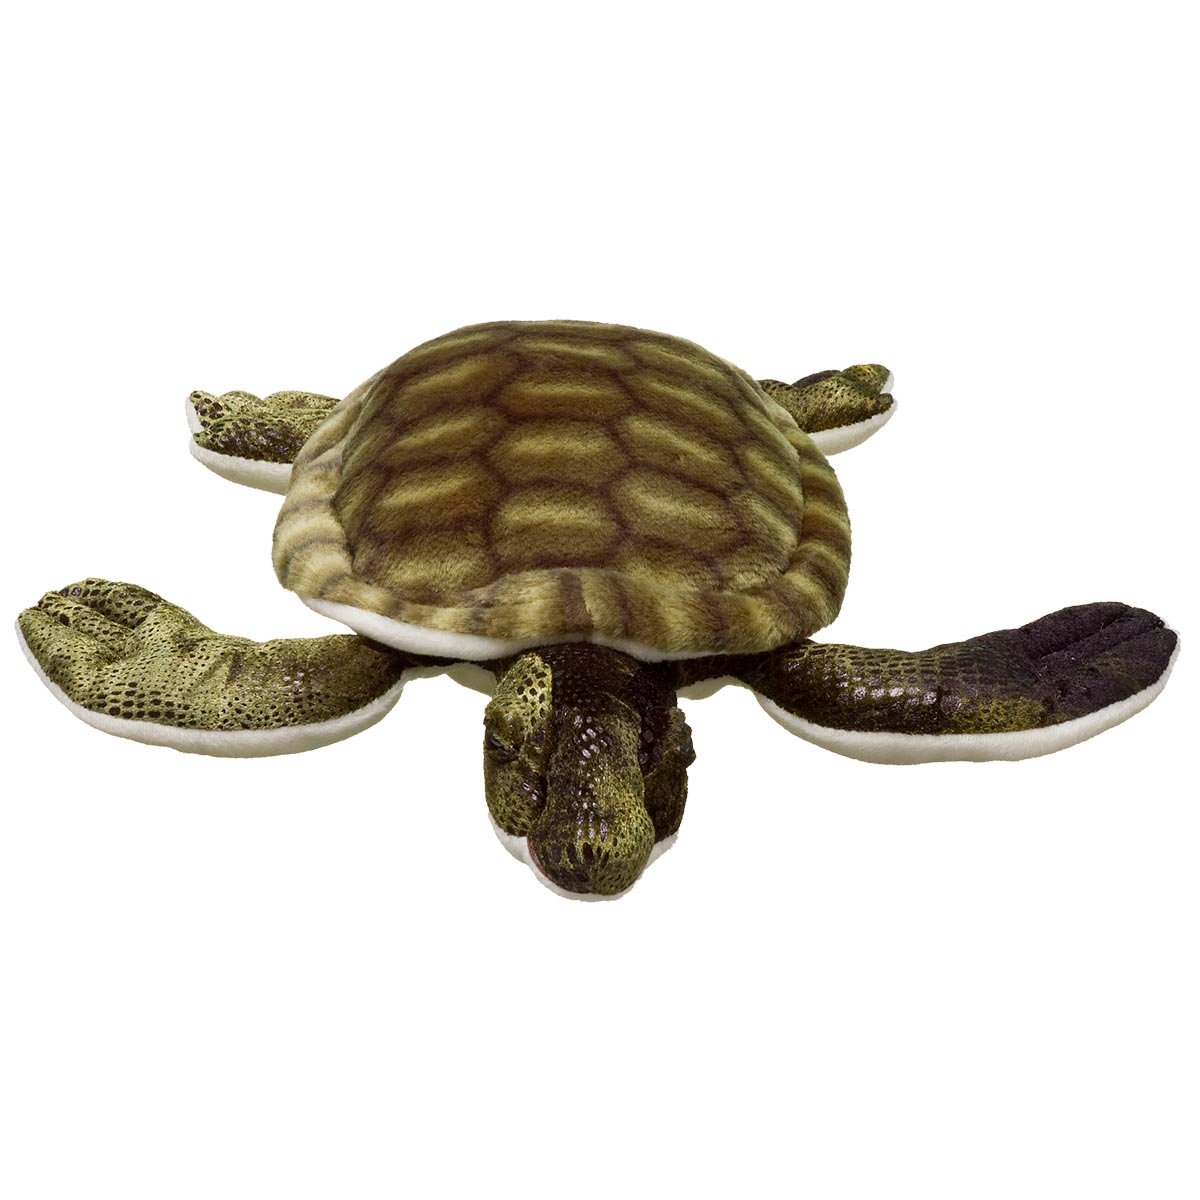 Adopt a Green Turtle | Symbolic Adoptions from WWF